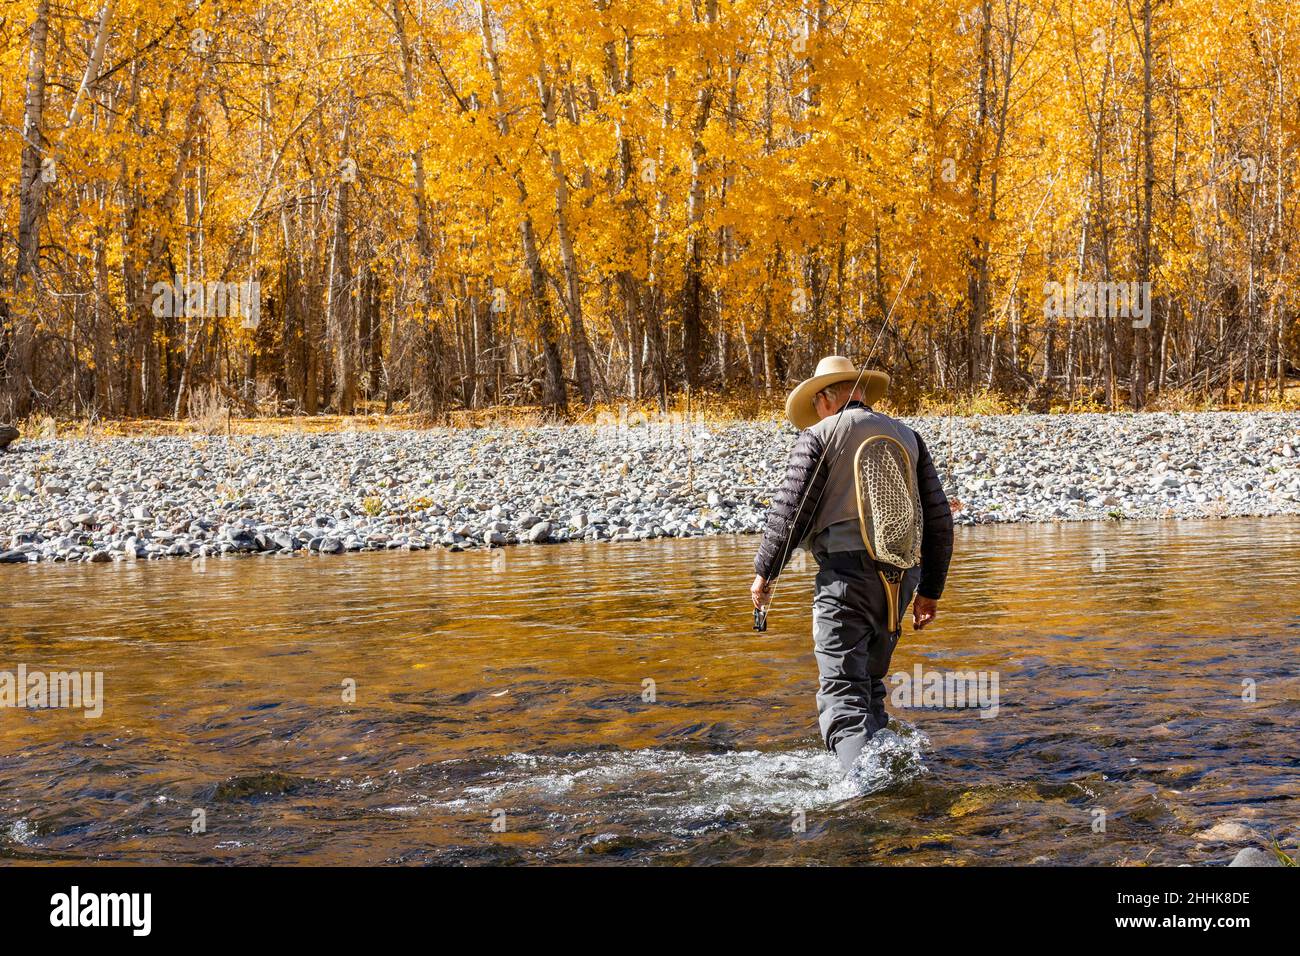 USA, Idaho, Bellevue, Rear view of senior fisherman wading in Big Wood River in Autumn Stock Photo